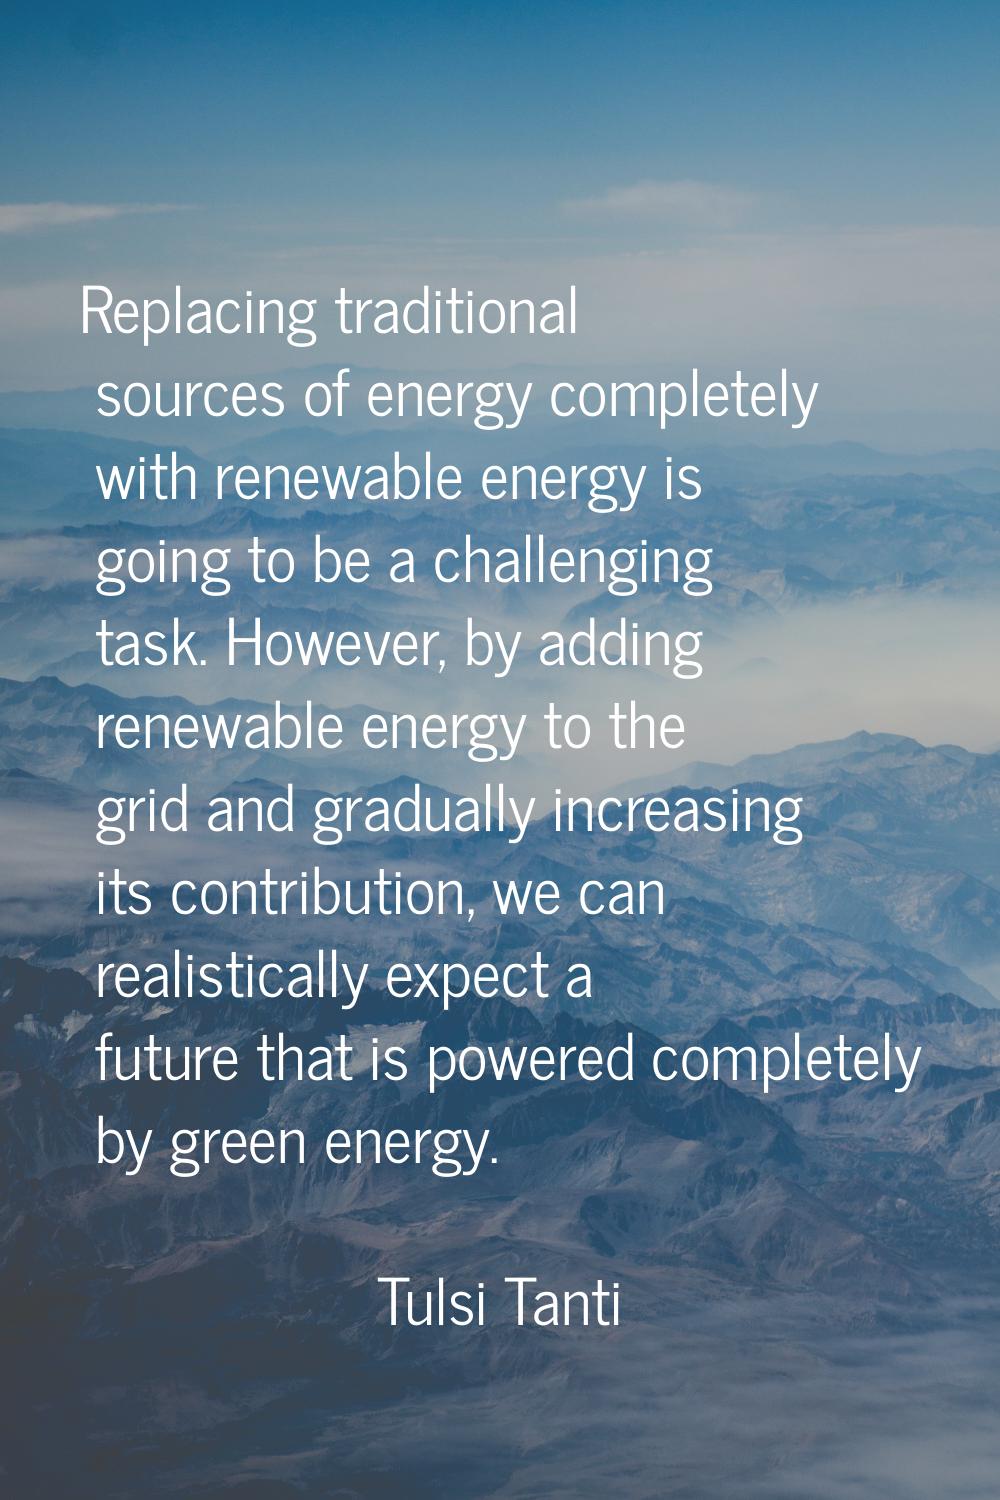 Replacing traditional sources of energy completely with renewable energy is going to be a challengi